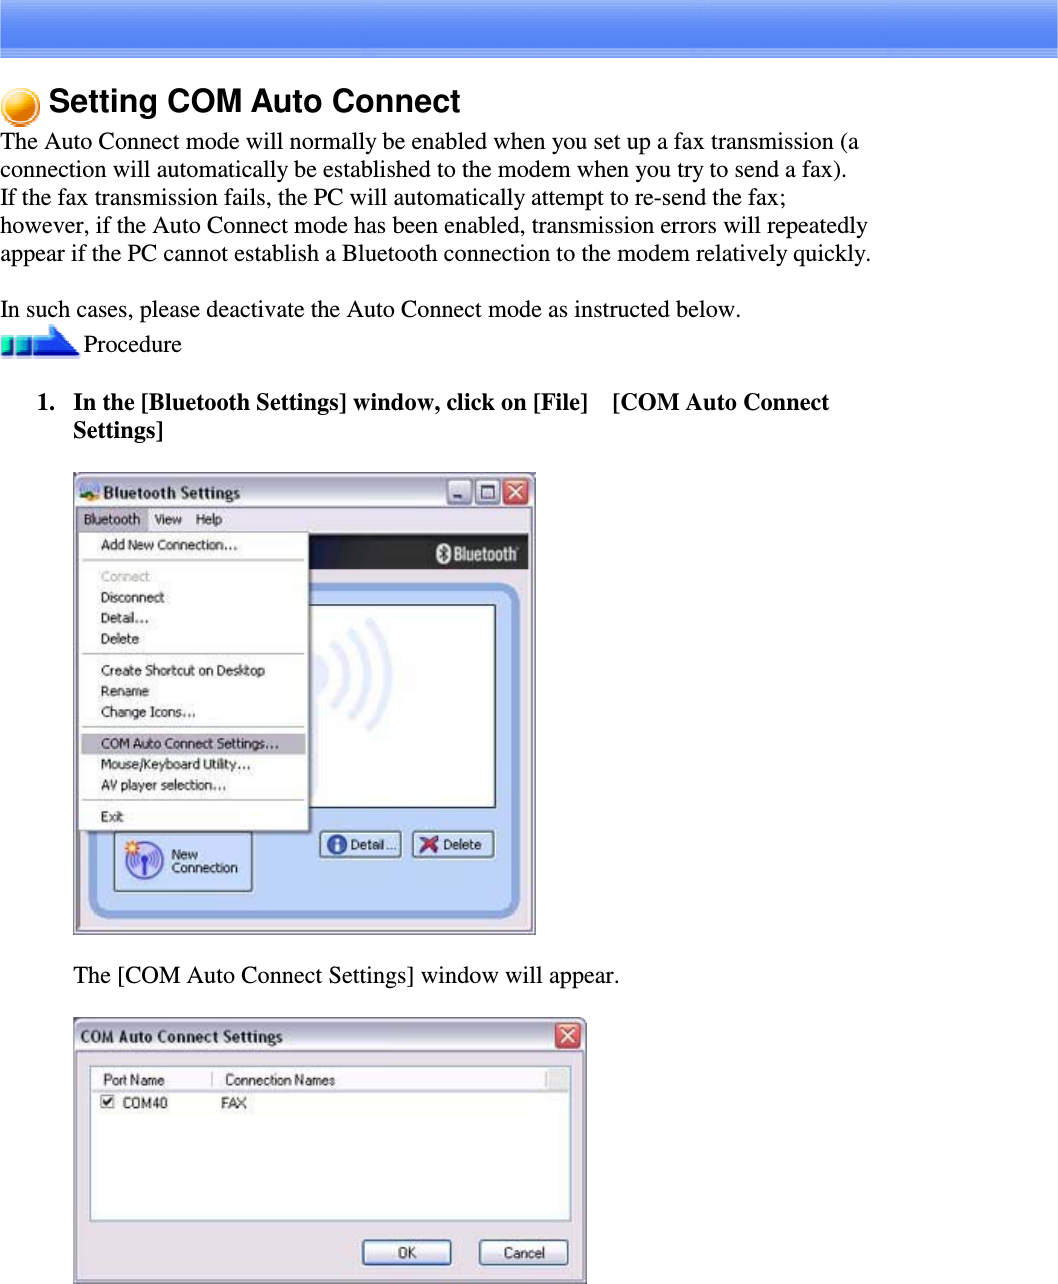 Setting COM Auto ConnectThe Auto Connect mode will normally be enabled when you set up a fax transmission (aconnection will automatically be established to the modem when you try to send a fax).If the fax transmission fails, the PC will automatically attempt to re-send the fax;however, if the Auto Connect mode has been enabled, transmission errors will repeatedlyappear if the PC cannot establish a Bluetooth connection to the modem relatively quickly.In such cases, please deactivate the Auto Connect mode as instructed below.Procedure1. In the [Bluetooth Settings] window, click on [File][COM Auto ConnectSettings]The [COM Auto Connect Settings] window will appear.